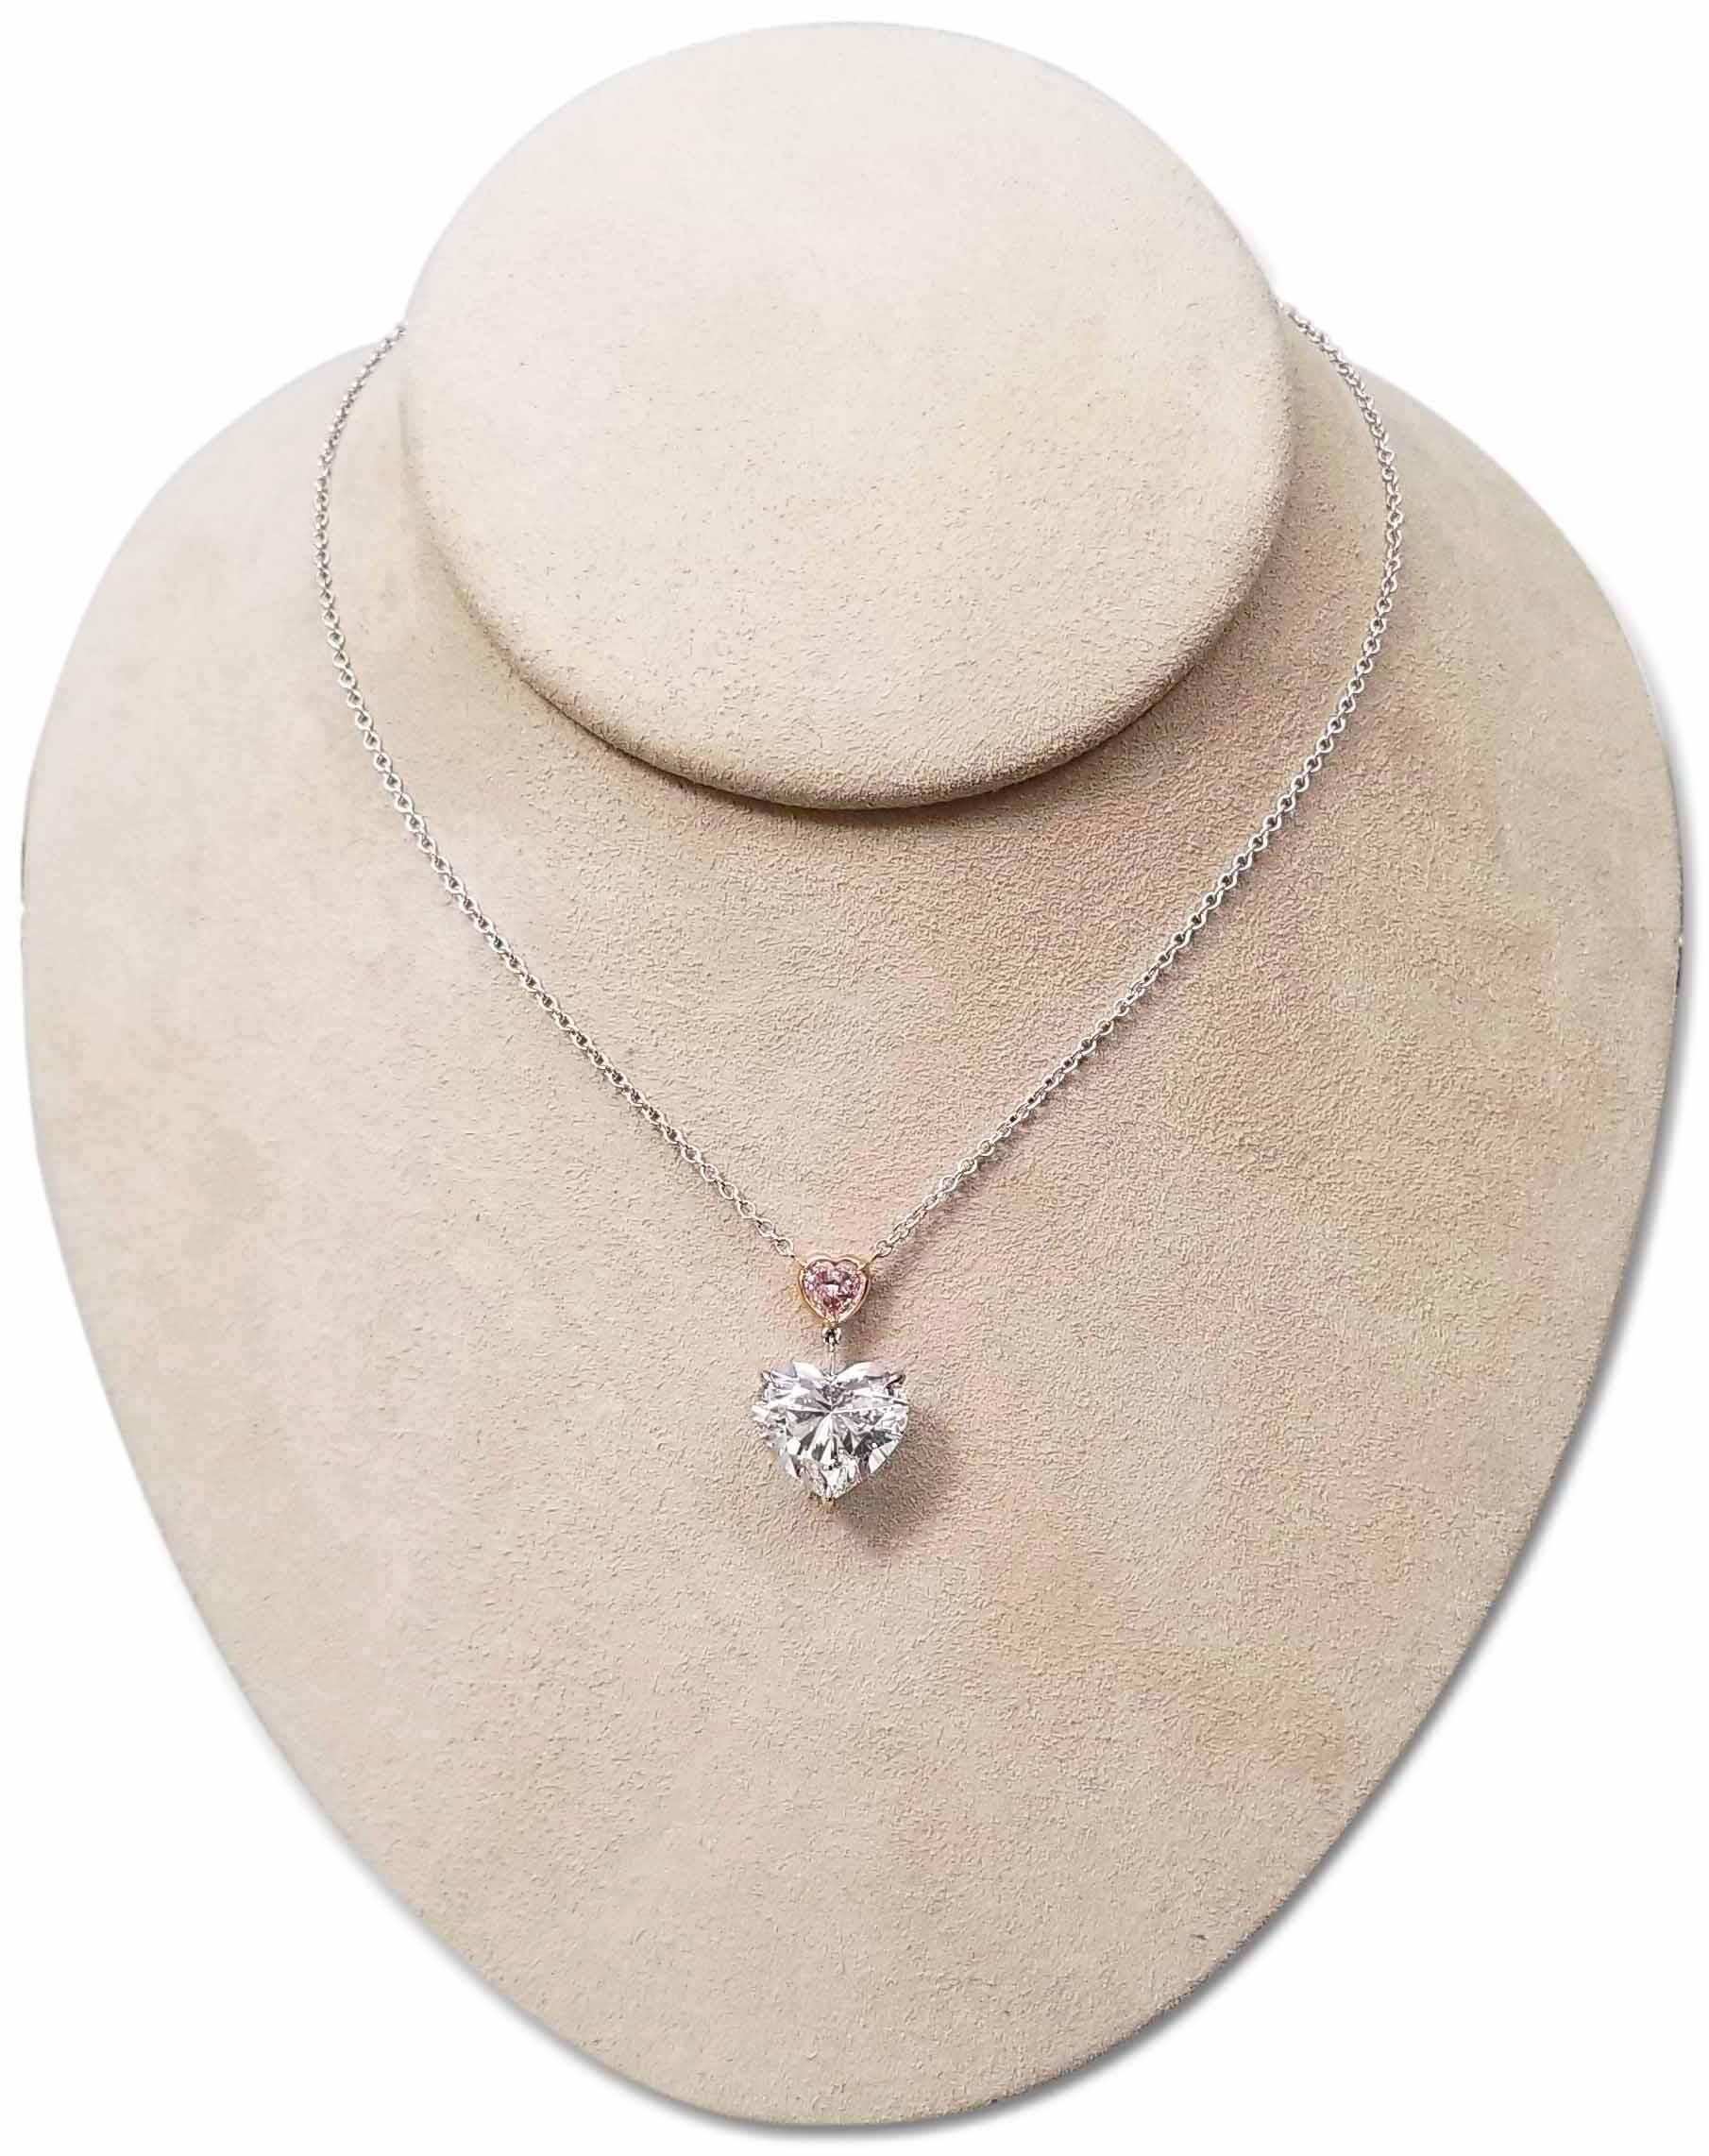 Scarselli is featuring this 7.01 carat heart shape E color diamond and an A 0.51 carat light pink I2 heart shape mounted on a handmade platinum and 18 karats rose gold chain necklace (see certificate picture for detailed stones information). A